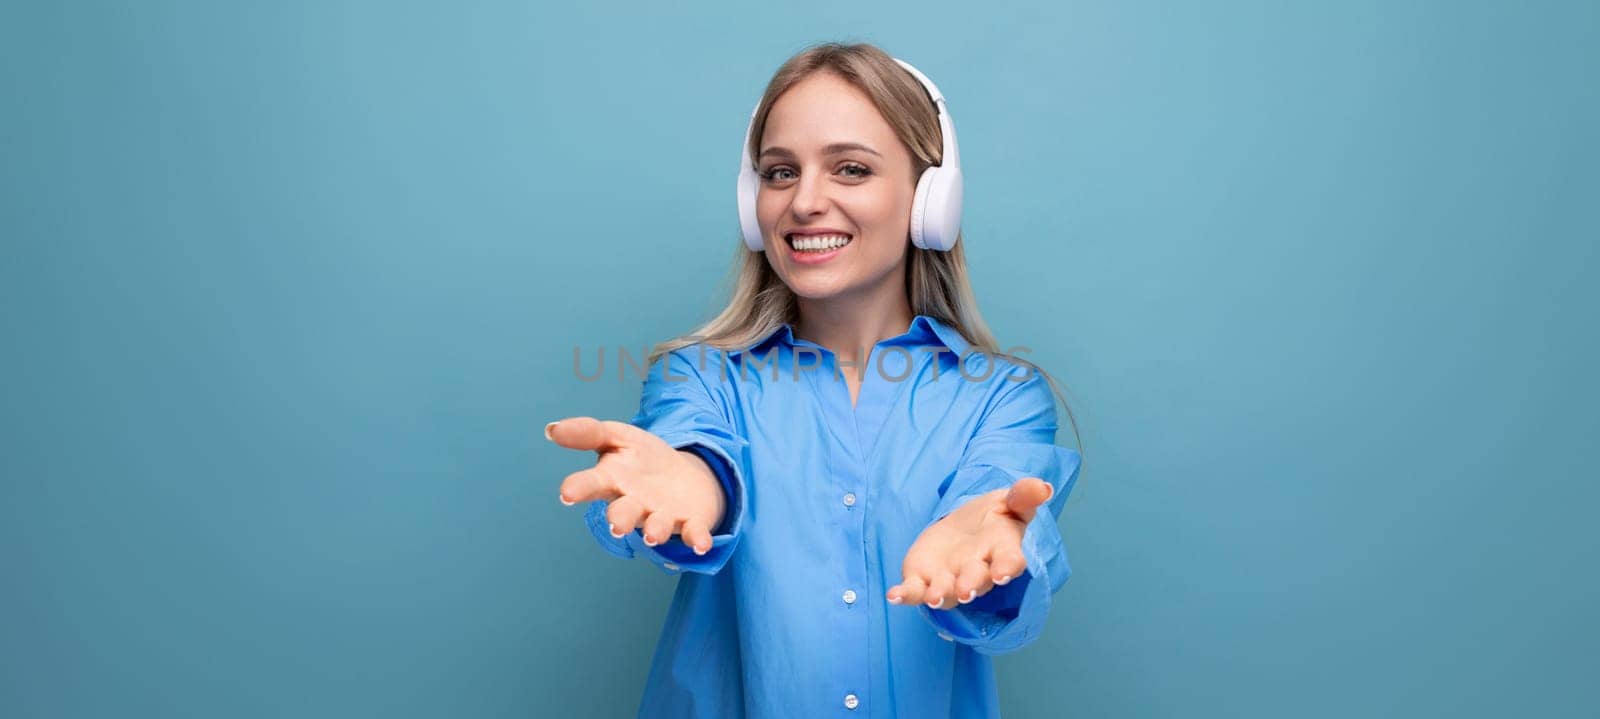 joyful lucky girl in big headphones without a wire stretches out her hands on a blue background with copy space.